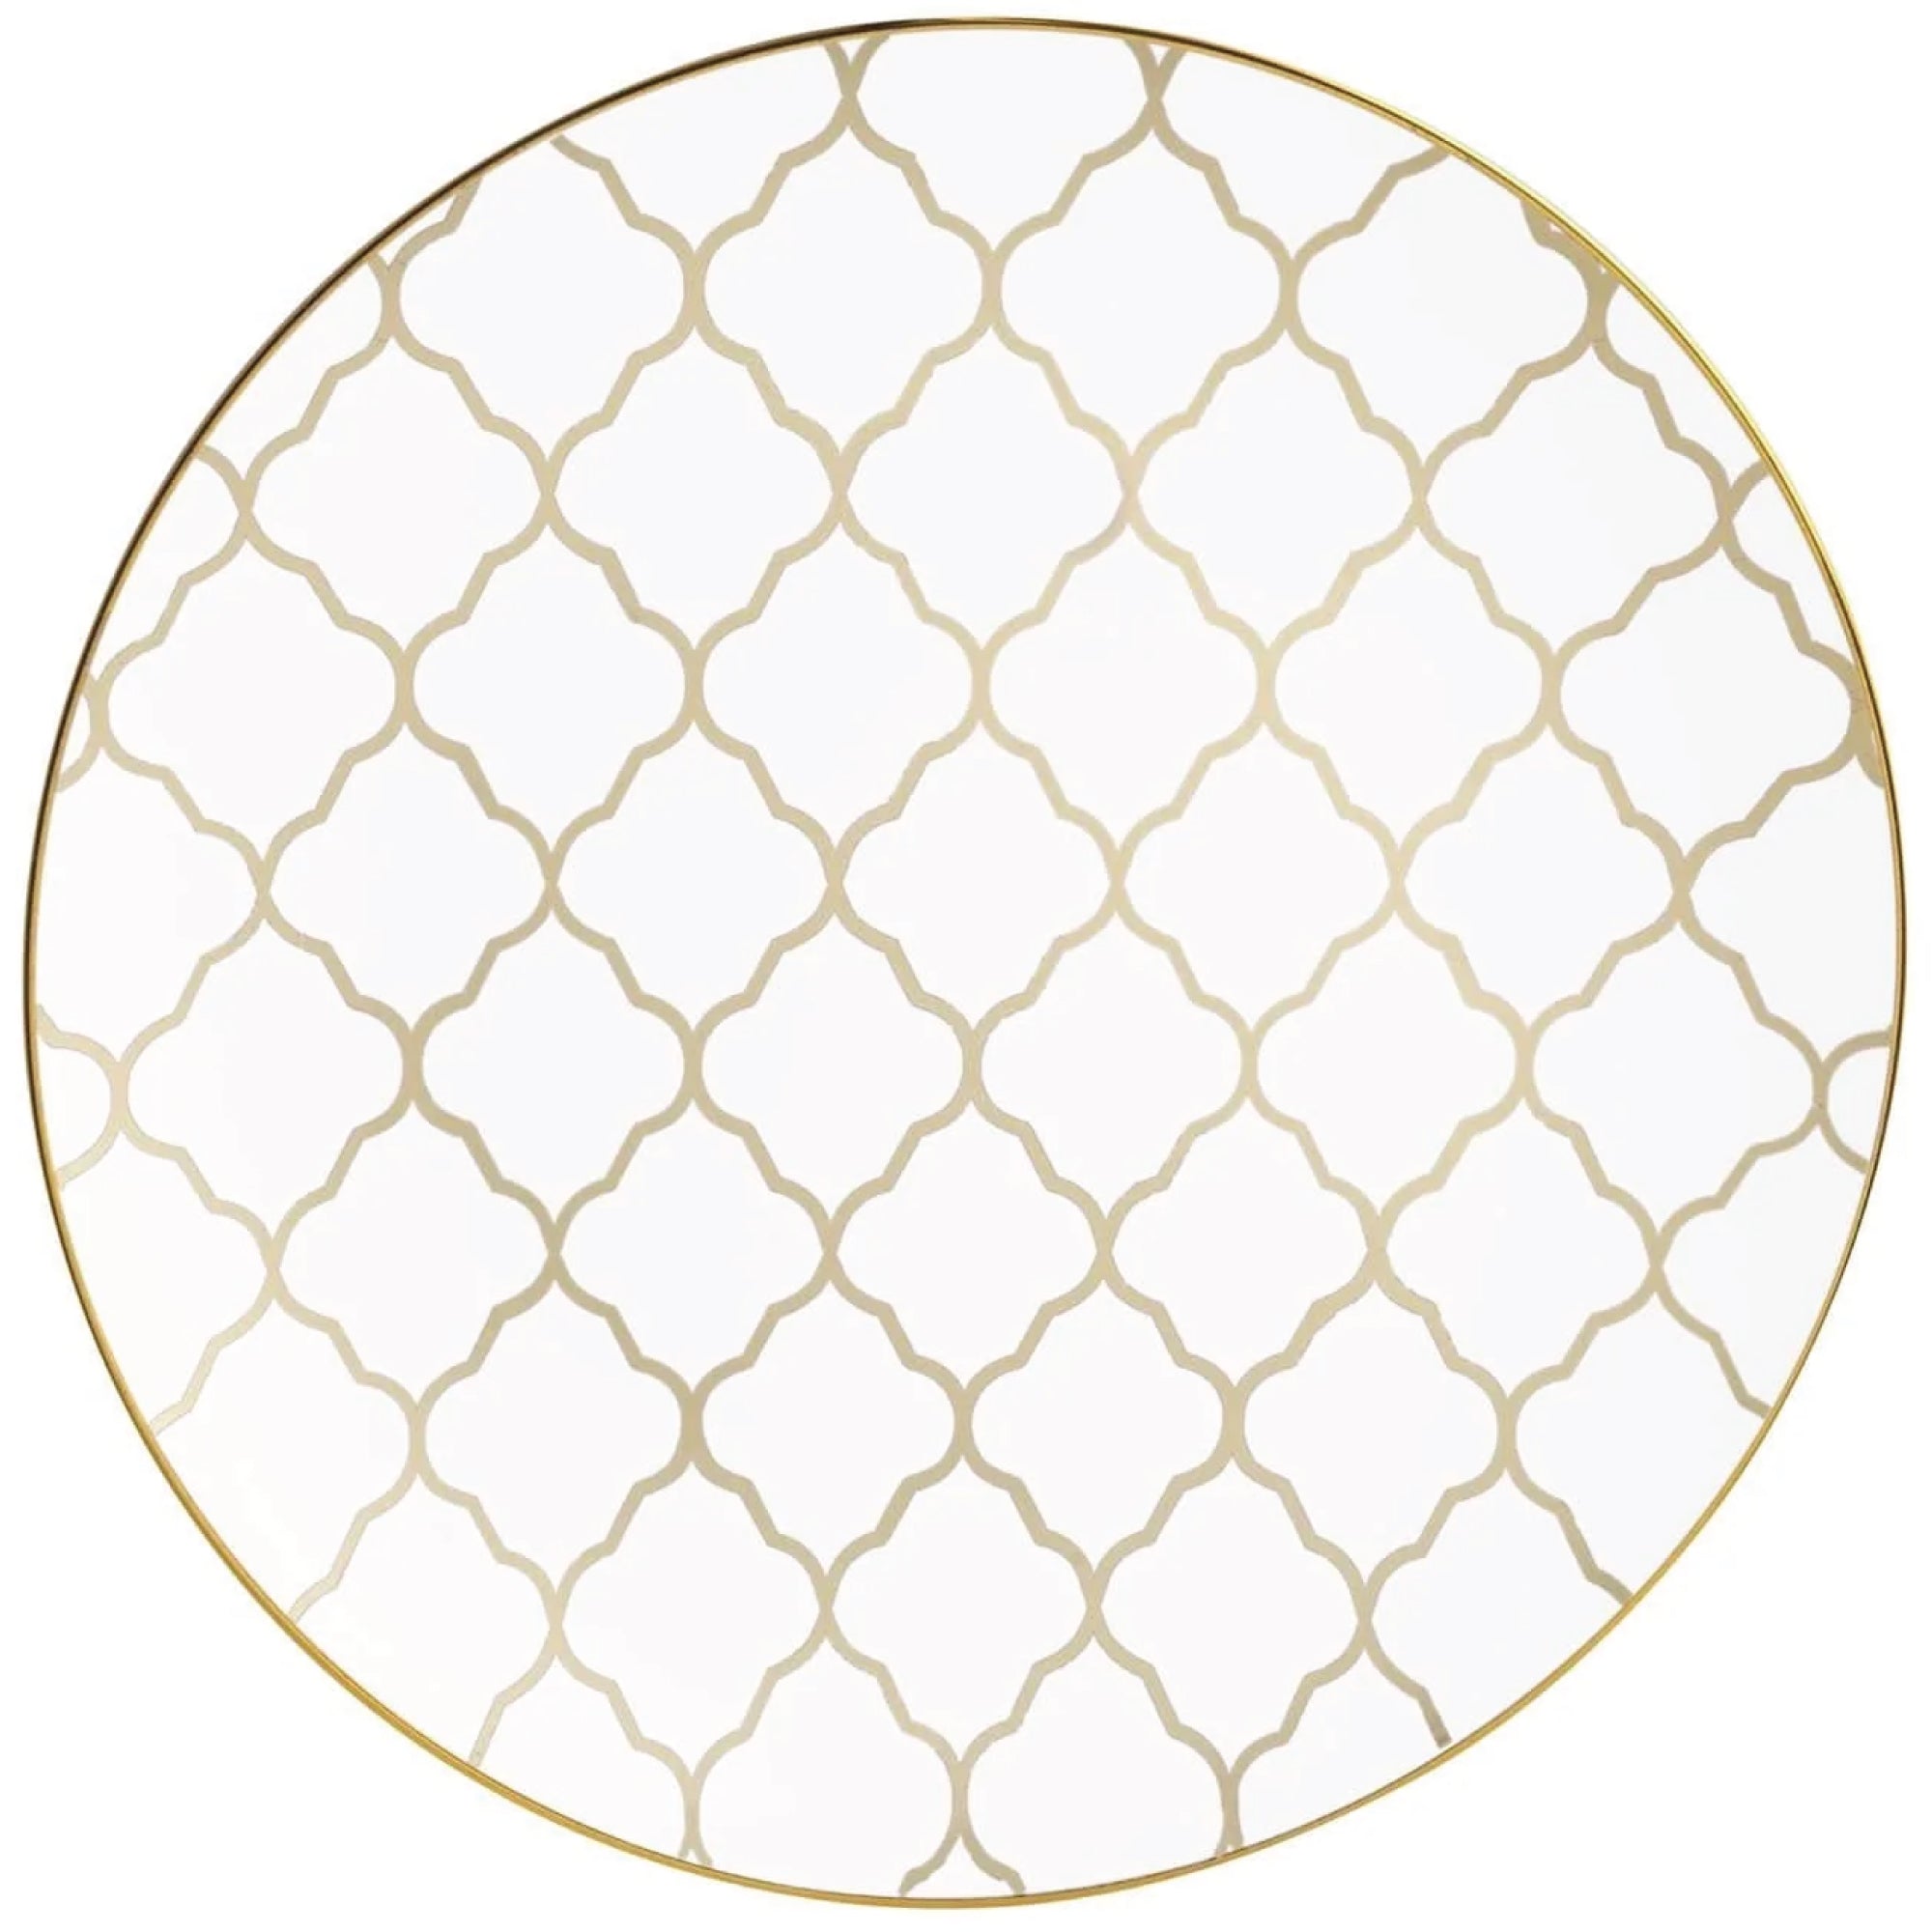 White & Gold Lattice Plastic Dinner Plates 10ct | The Party Darling